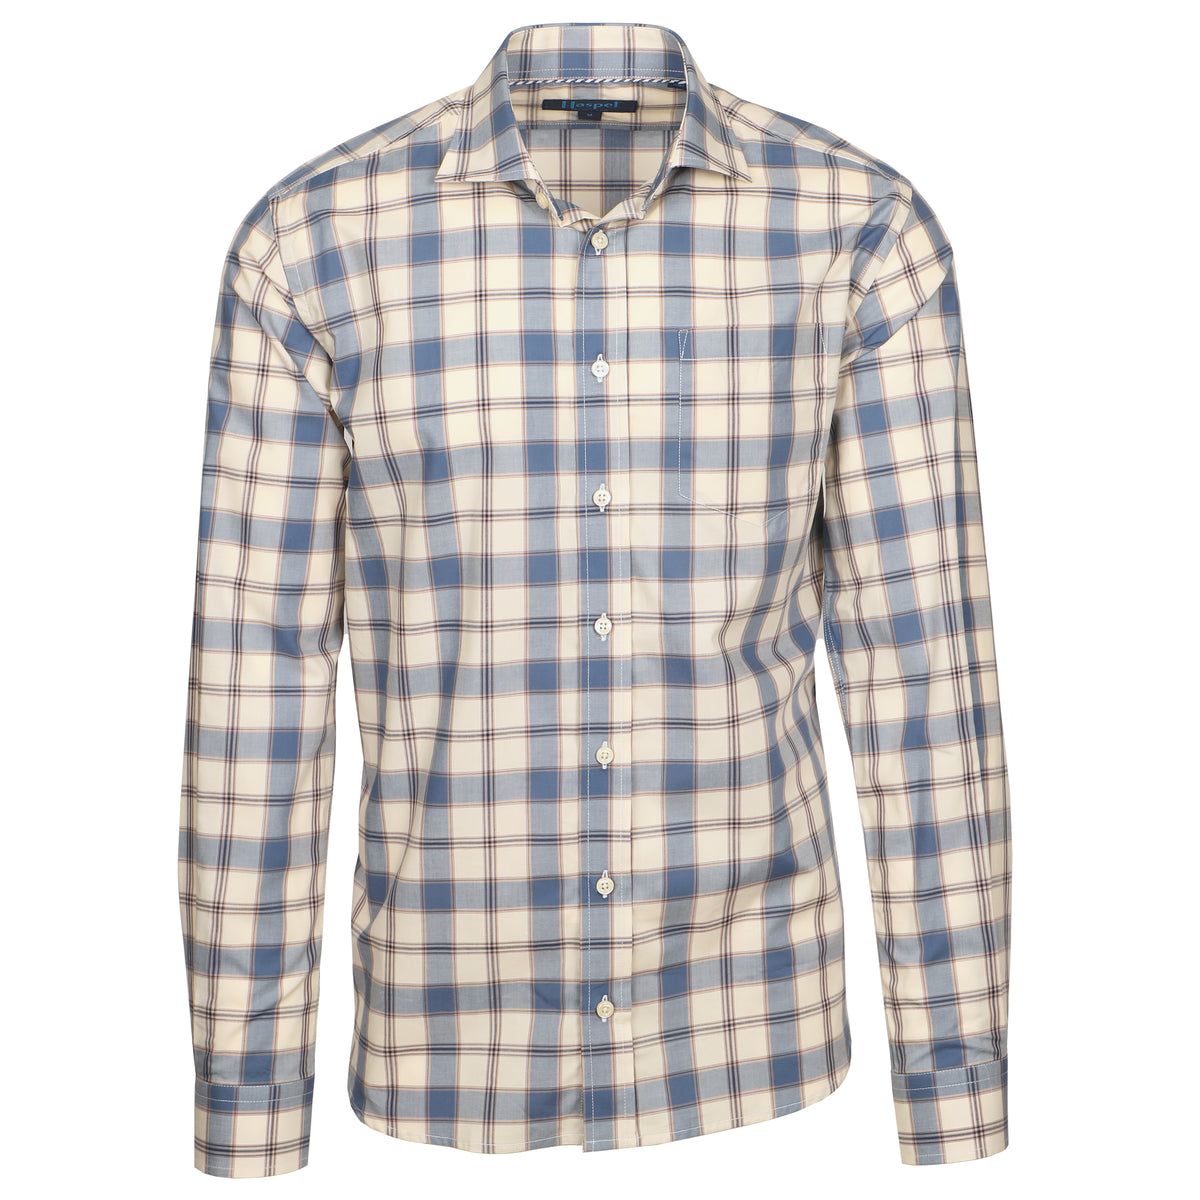 We know you love blue plaid, so we&#39;ve shaken it up with a little Ecru background. A relaxed, lightweight look for the office, dinner, and any good times in between.  100% Cotton Seersucker  •  Spread Collar  •  Long Sleeve  •  Chest Pocket  •  Machine Washable  •  Made in Italy